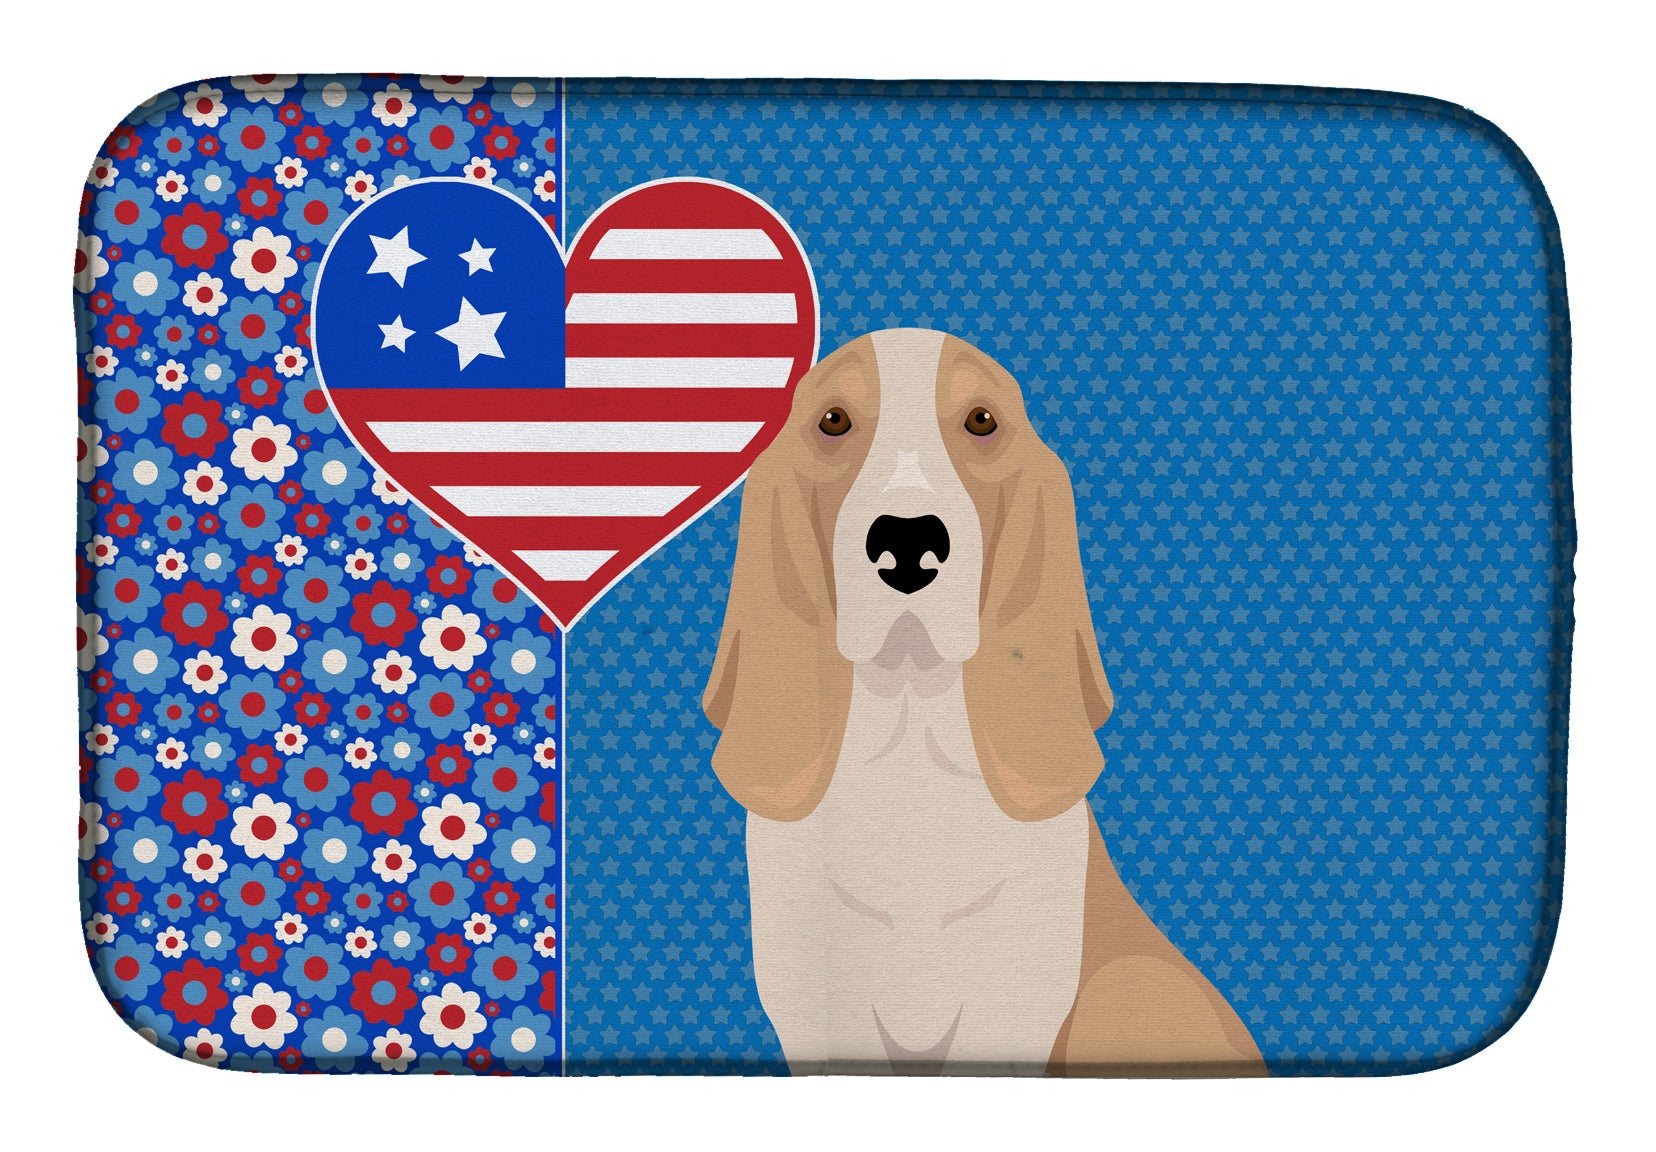 Lemon and White Tricolor Basset Hound USA American Dish Drying Mat